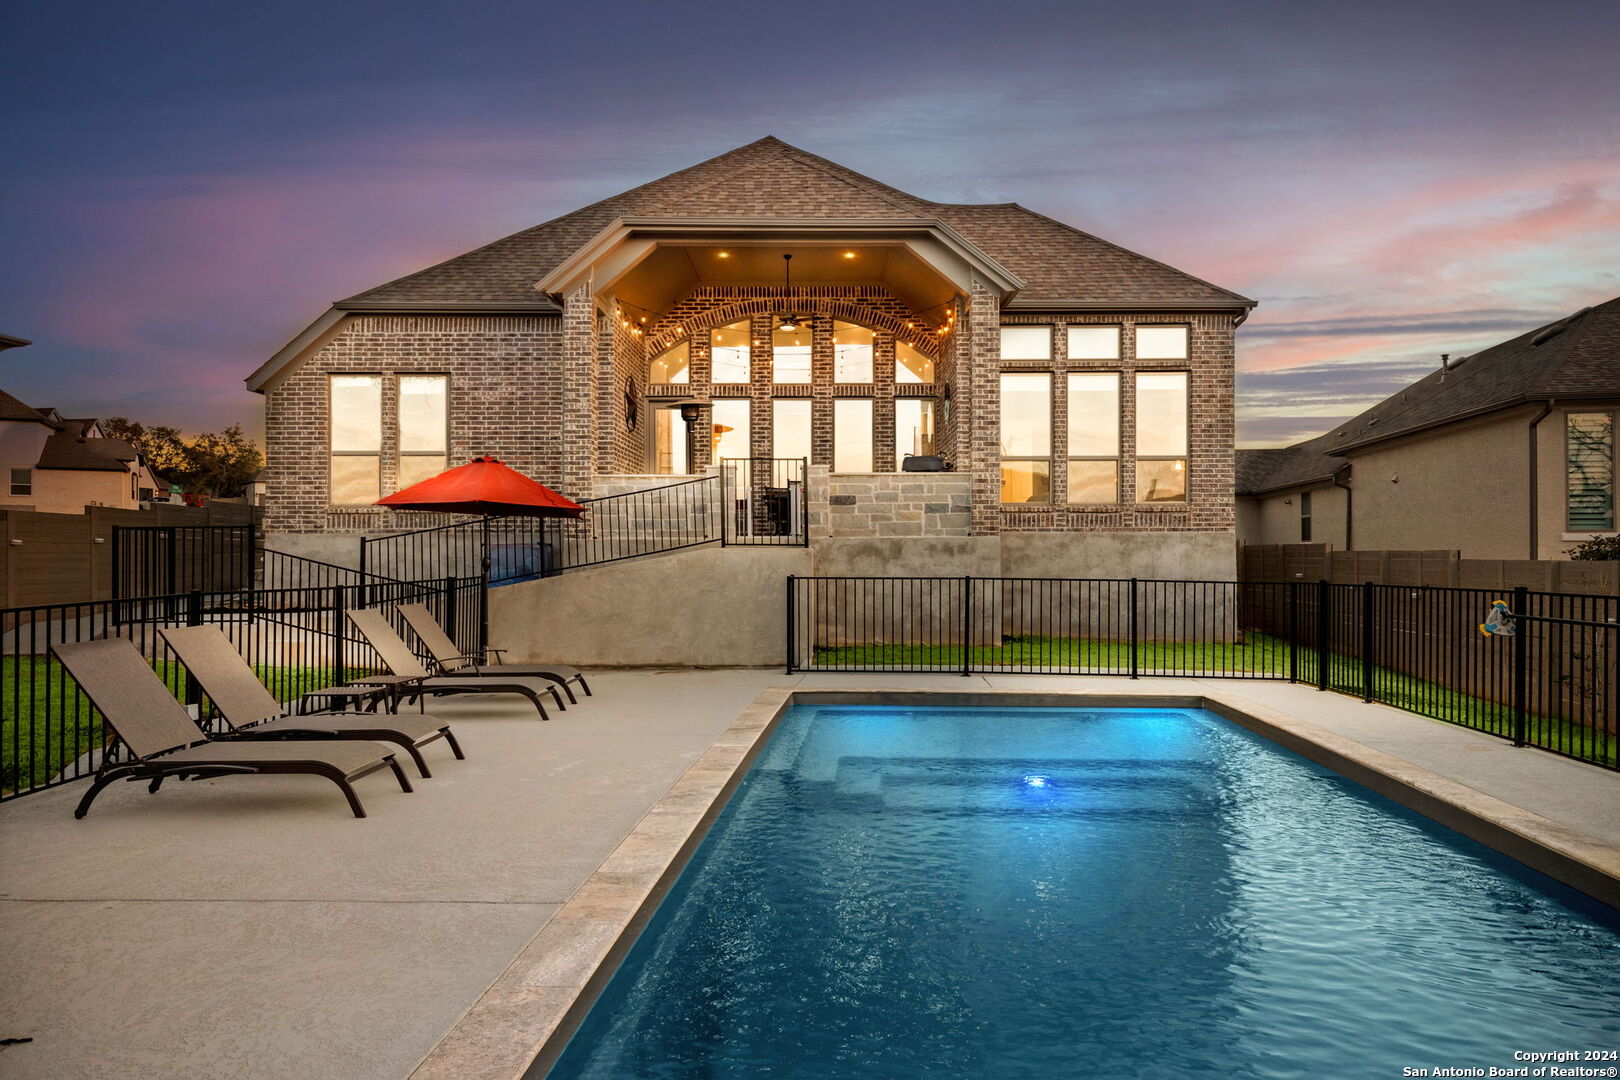 Photo of 422 Orchard Wy in New Braunfels, TX